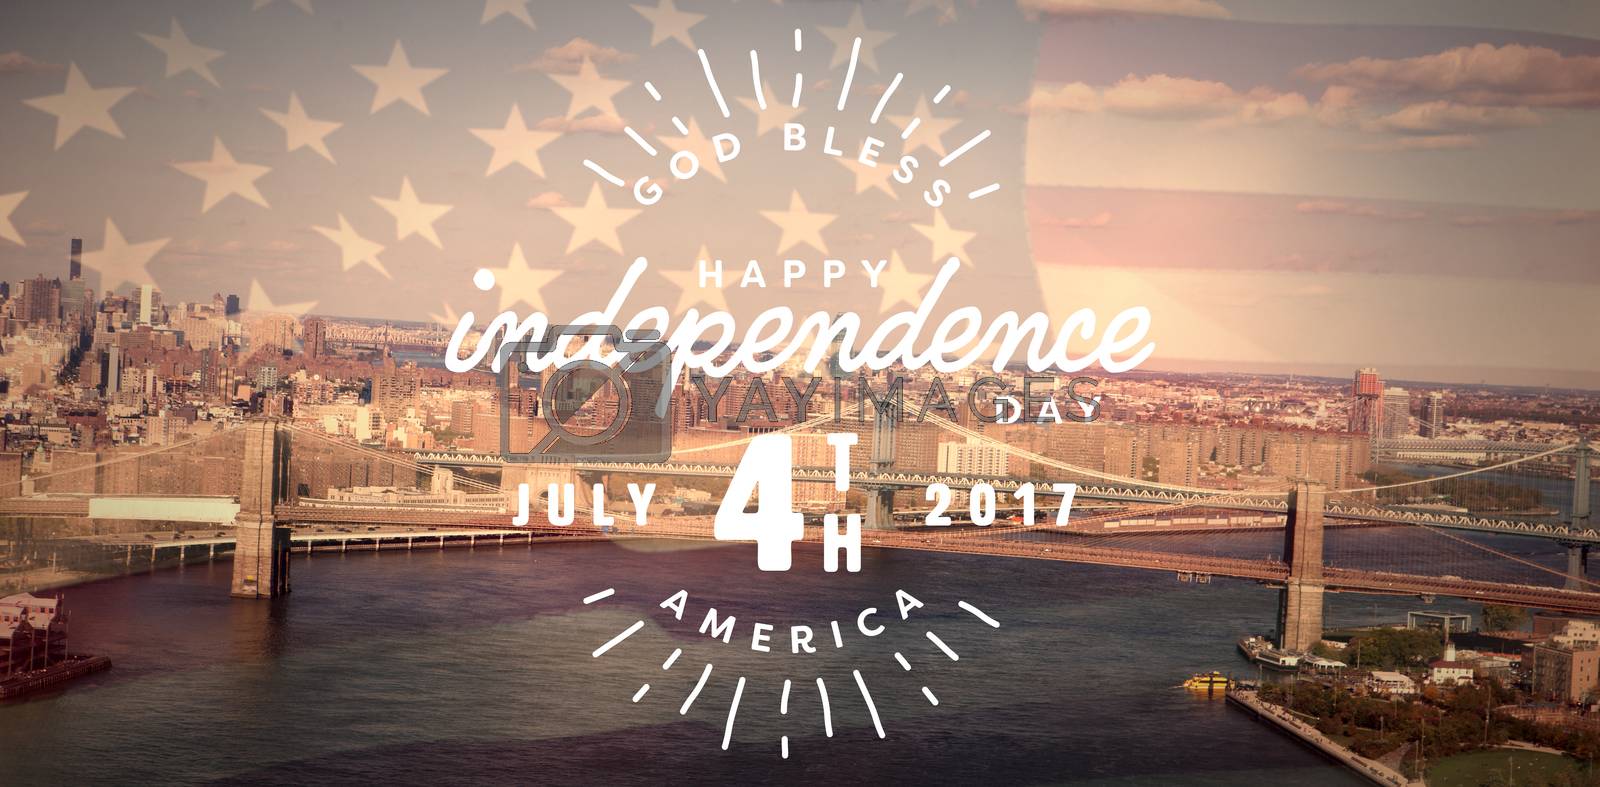 Royalty free image of Composite image of digitally generated image of happy 4th of july text by Wavebreakmedia